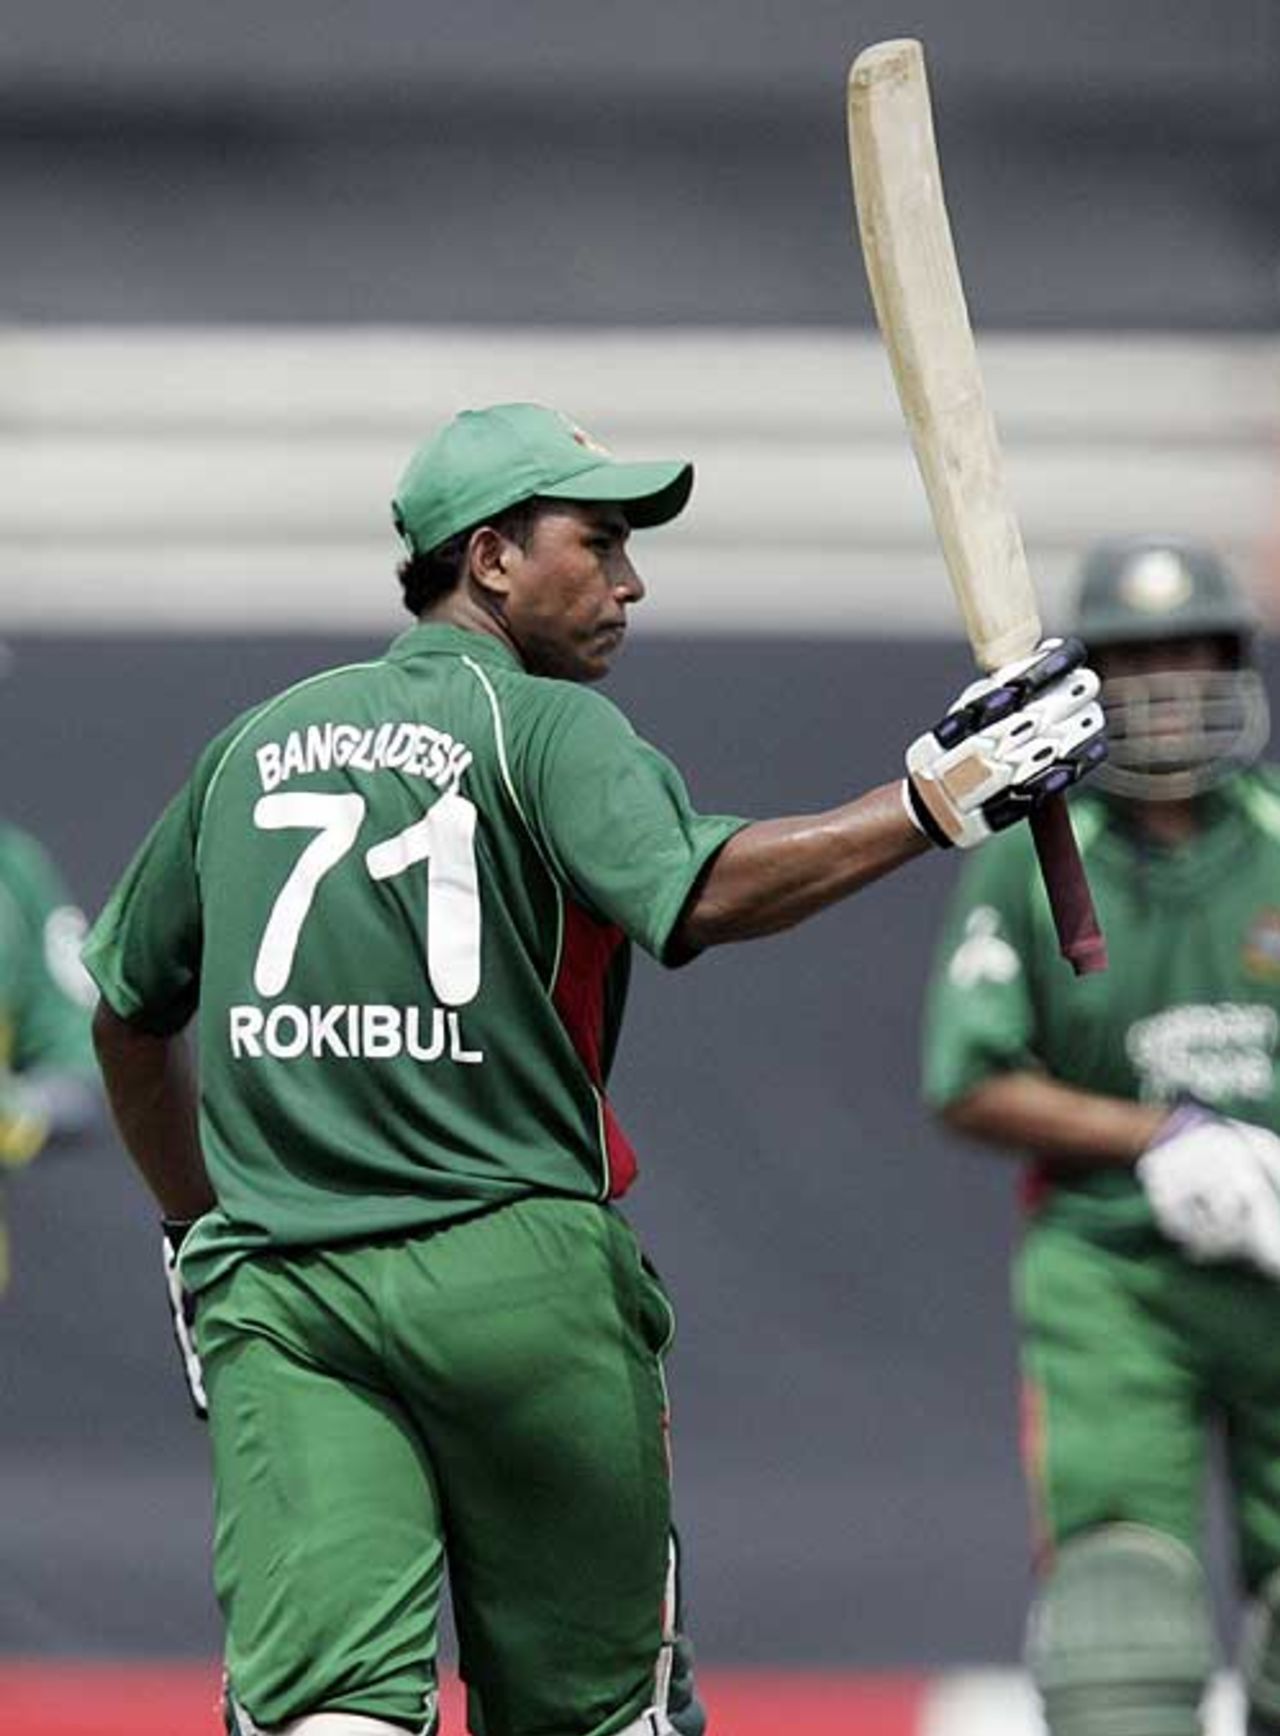 Raqibul Hasan scored a fifty in his second innings, Bangladesh v South Africa, 2nd ODI, Mirpur, March 12, 2008